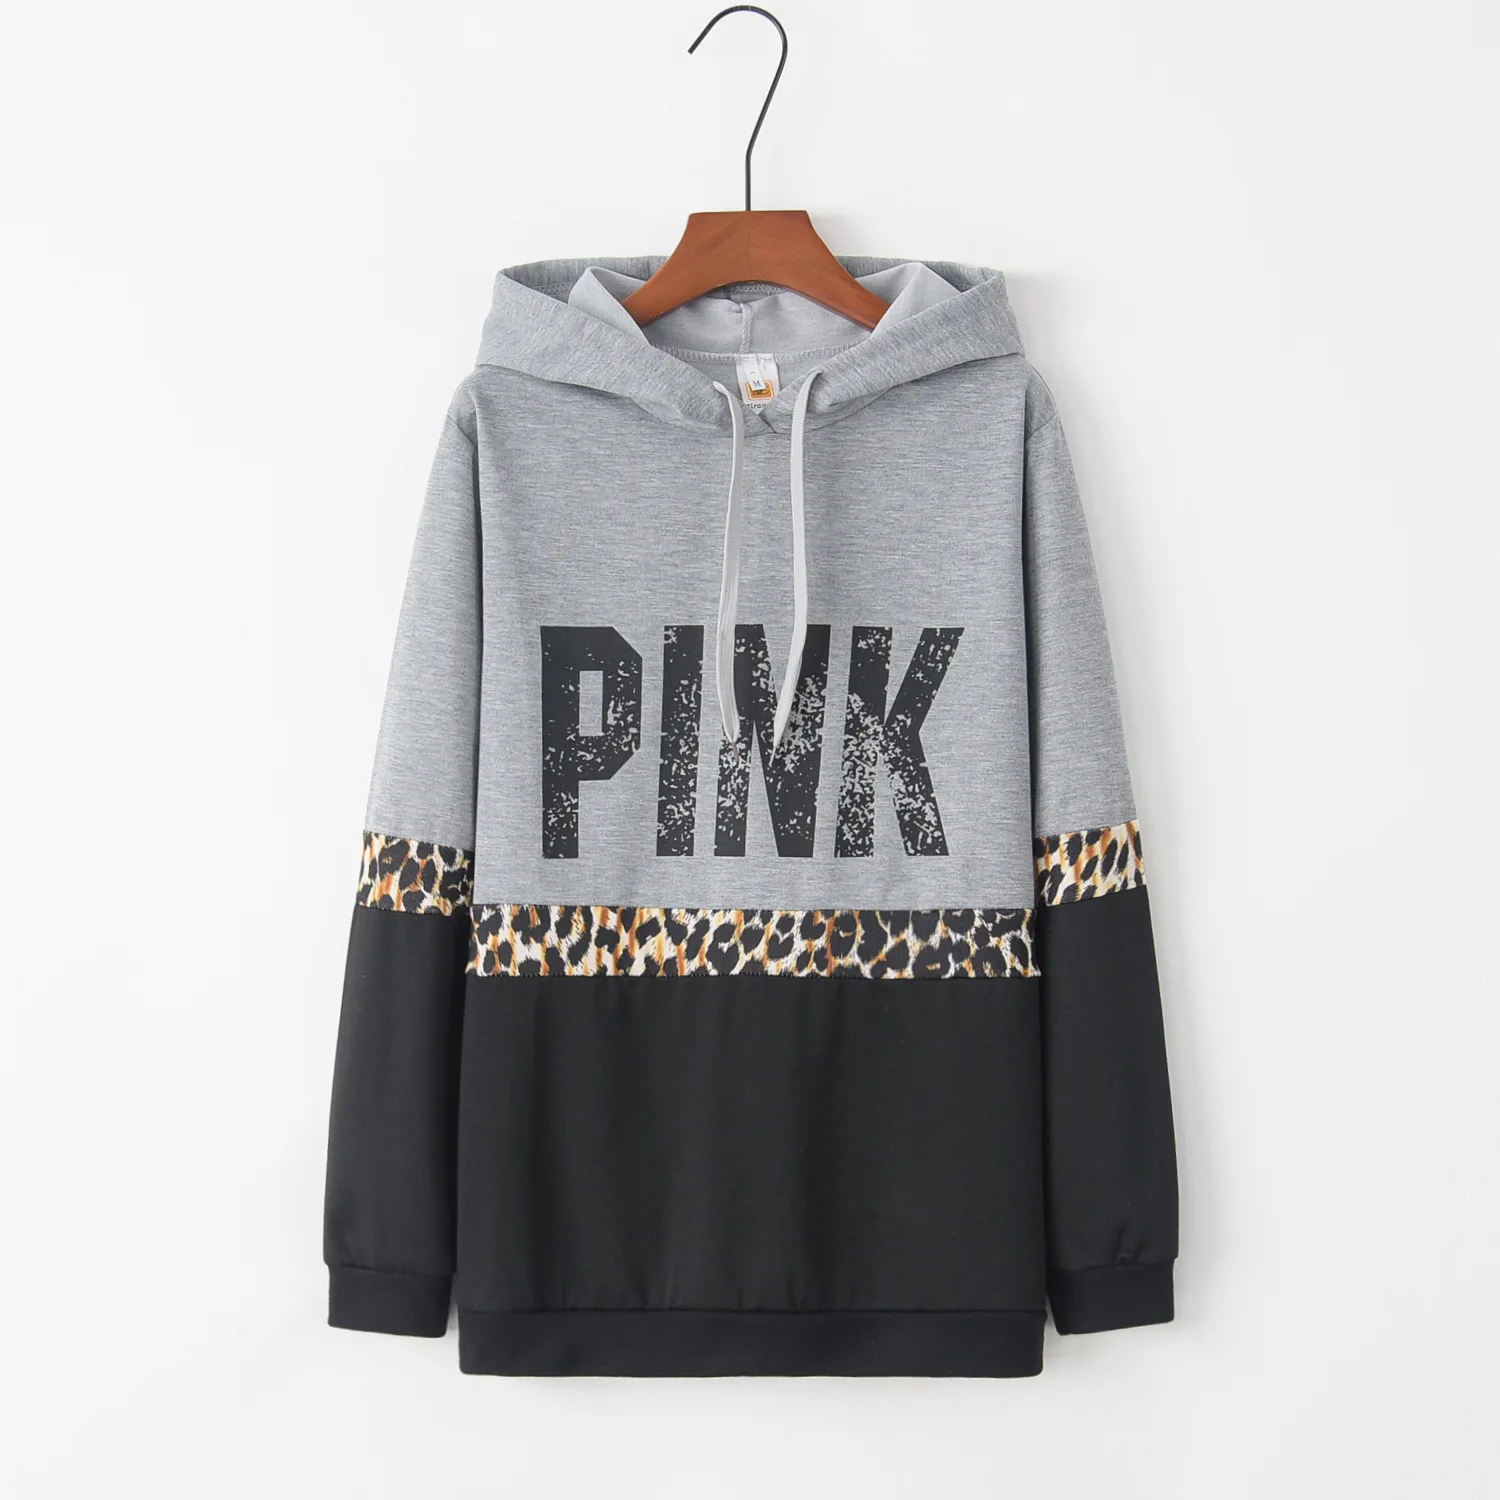 2023 Ladies PINK Letter Print Full Sleeve Hooded Sweatshirt Leopard Print Black Grey Casual Costume New Arrival Cotton Women Top new arrival model show exhibitor 6 options black velvet jewelry display for woman necklaces pendants mannequin jewelry stand